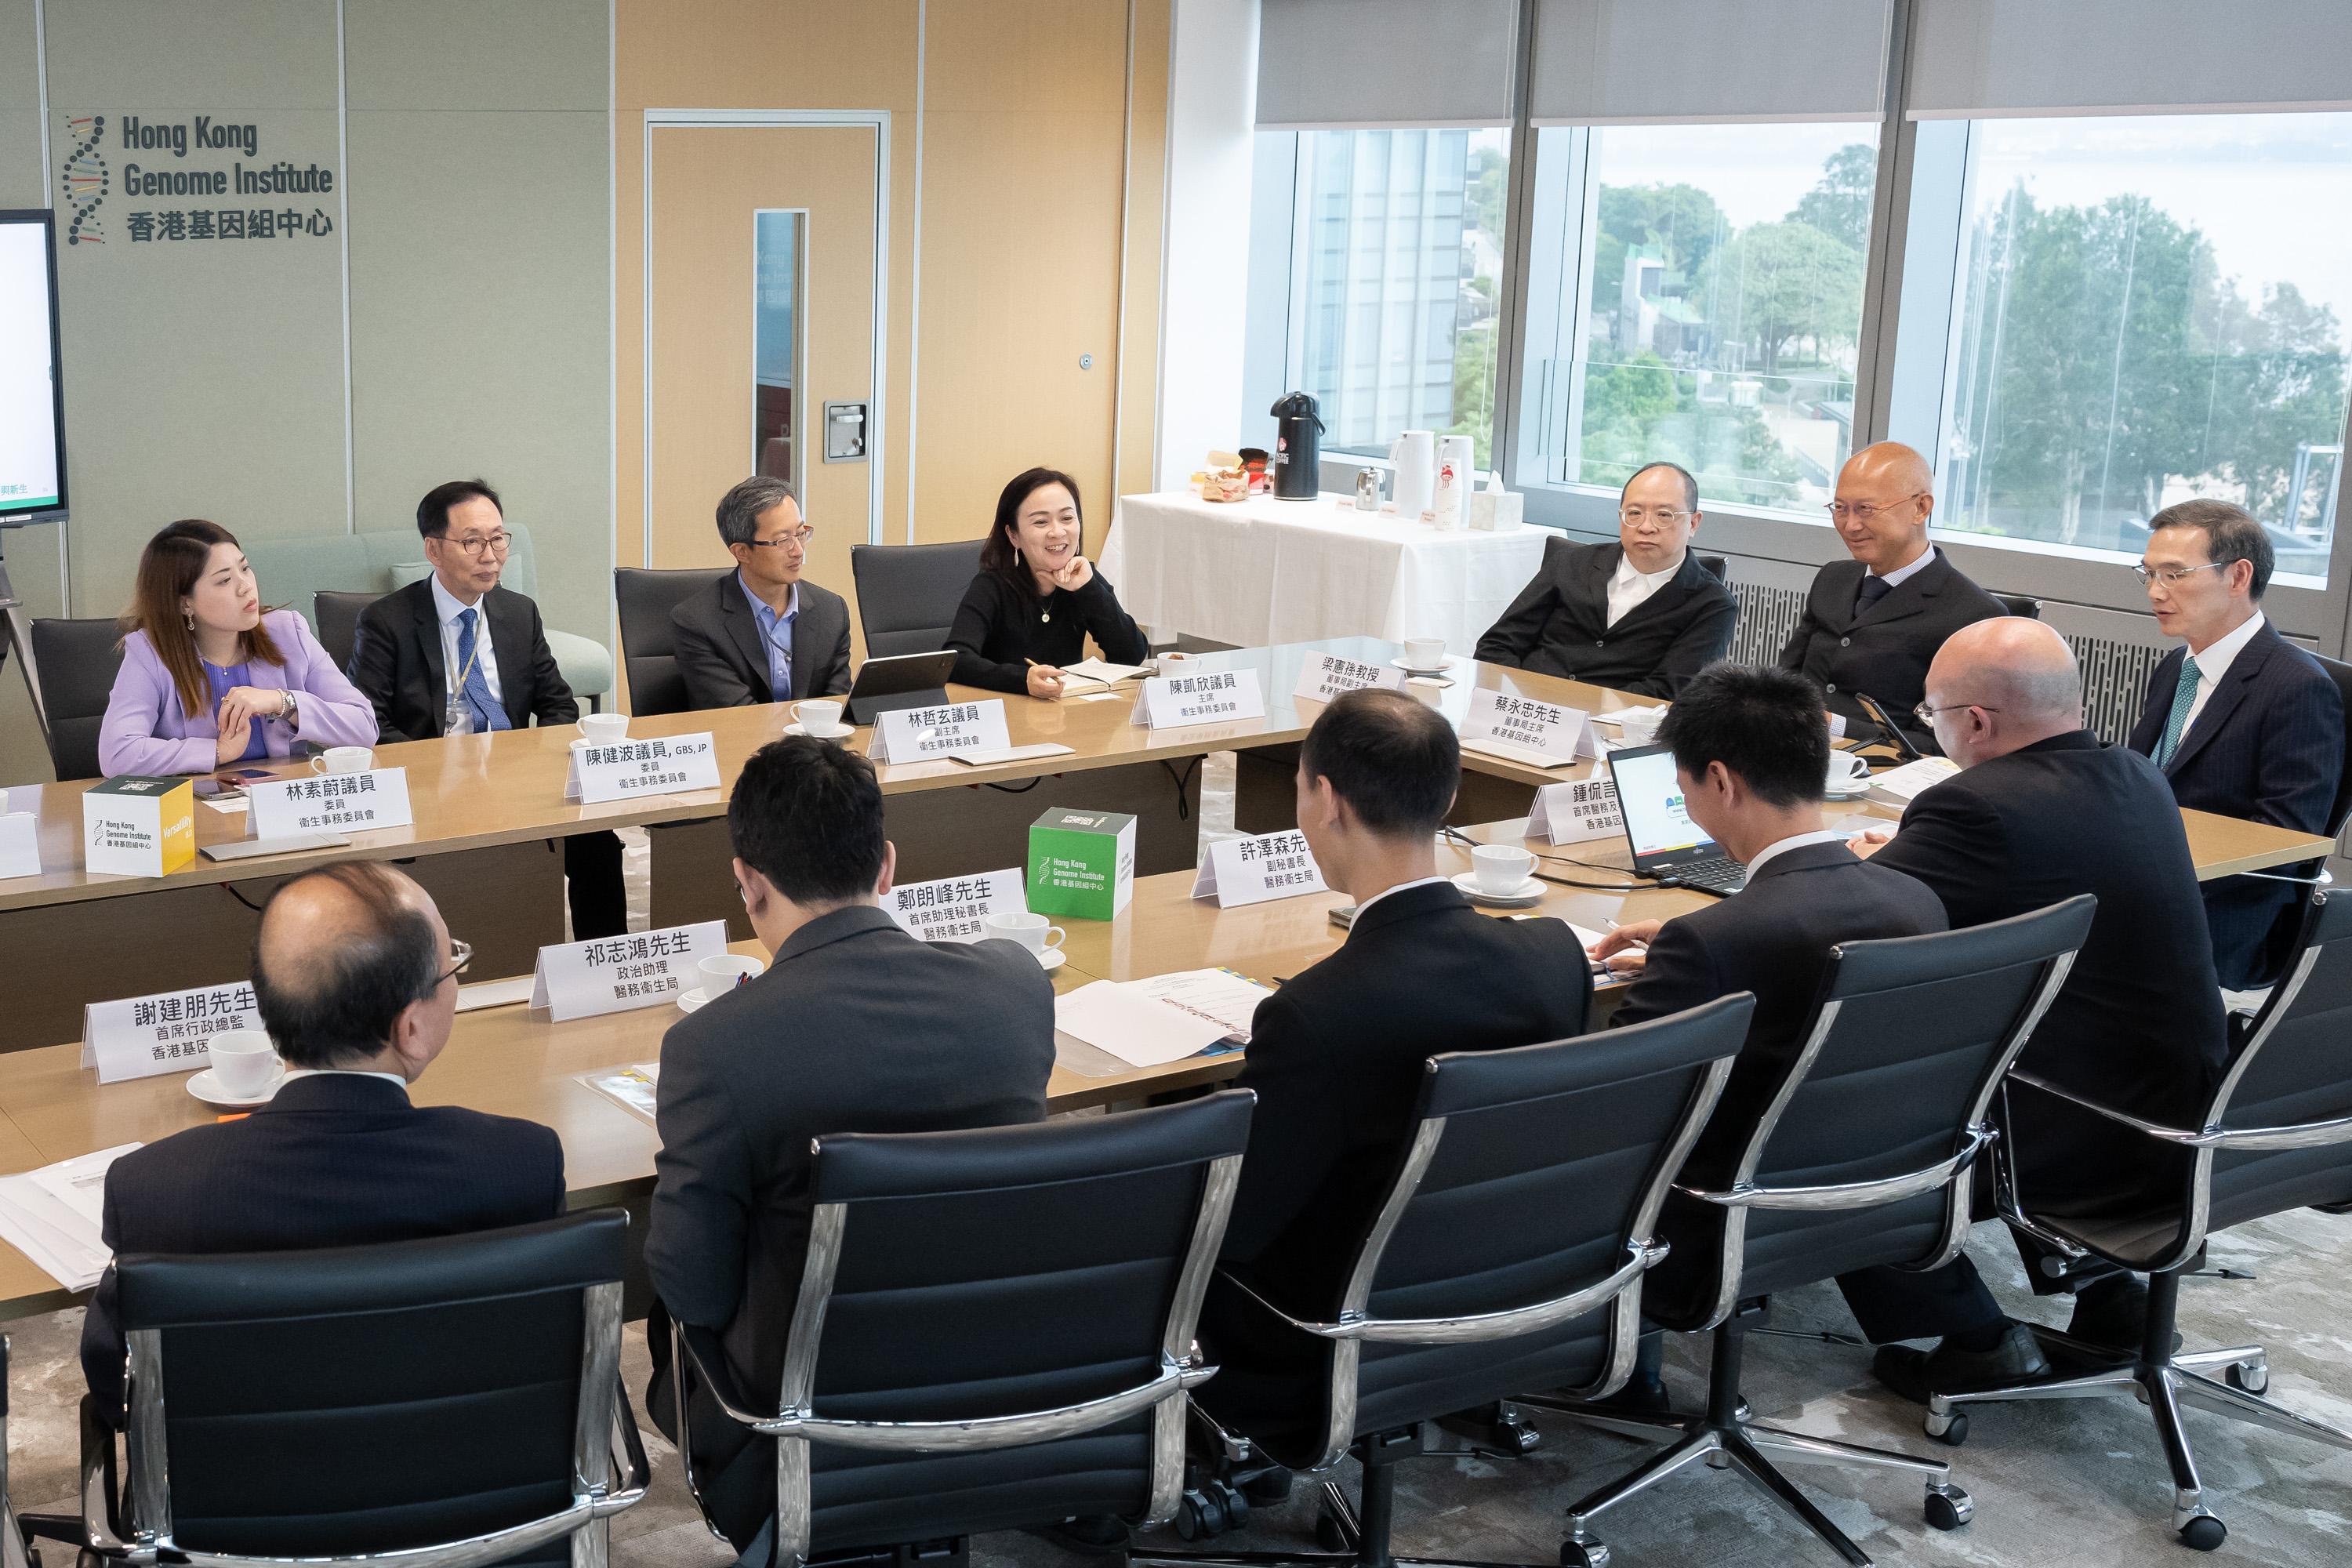 The Legislative Council (LegCo) Panel on Health Services visits the Hong Kong Genome Institute (HKGI) today (May 2). Photos shows LegCo Members receiving a briefing on the Hong Kong Genome Project by the management team of the HKGI.
